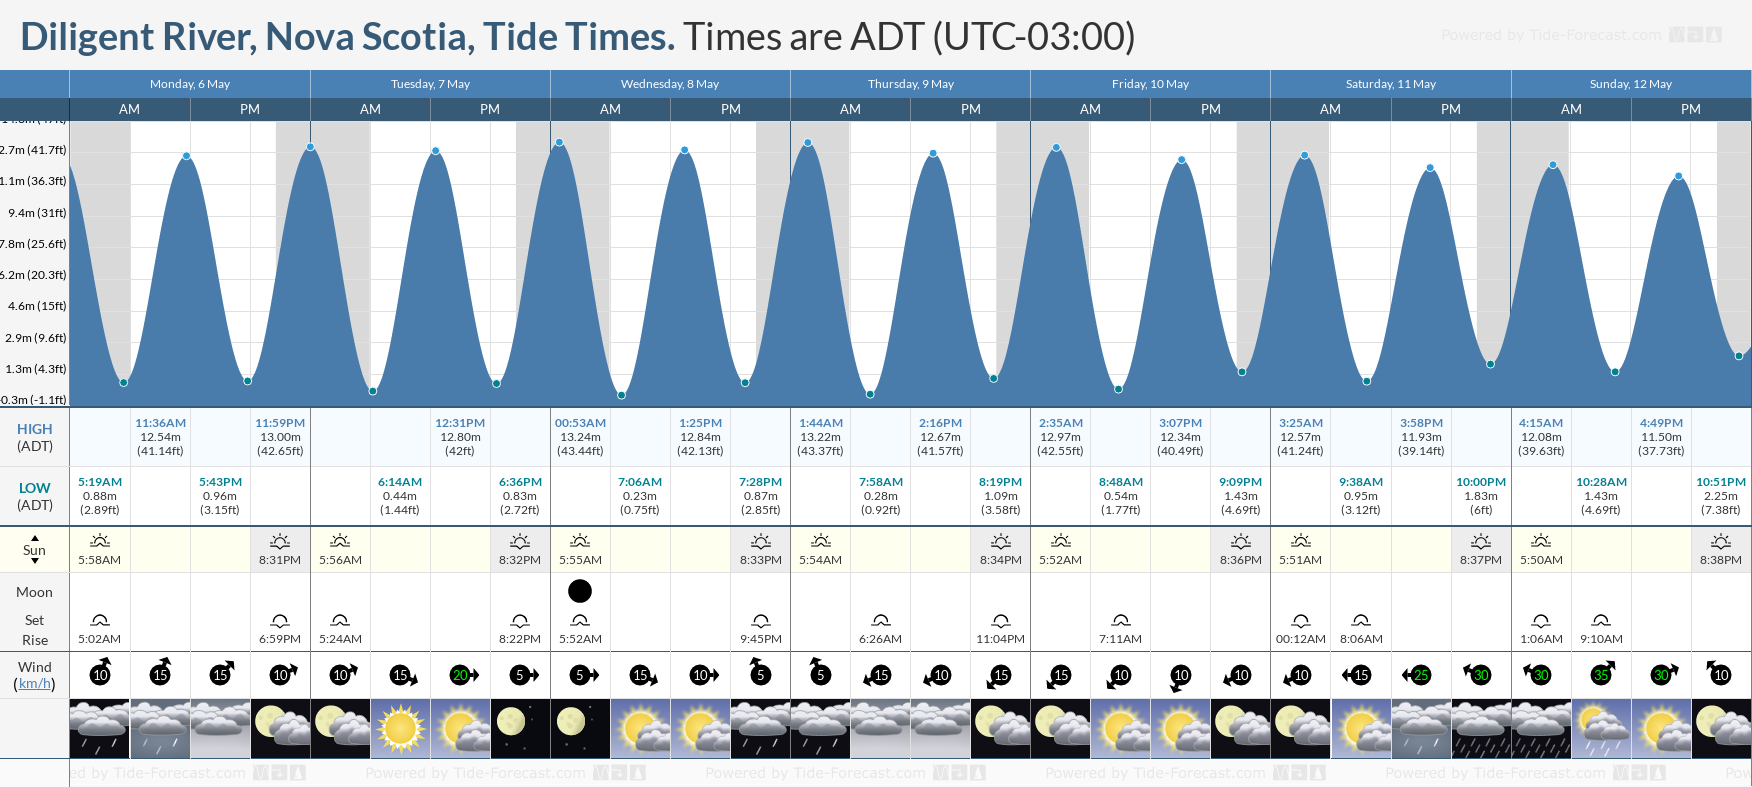 Diligent River, Nova Scotia Tide Chart including high and low tide tide times for the next 7 days